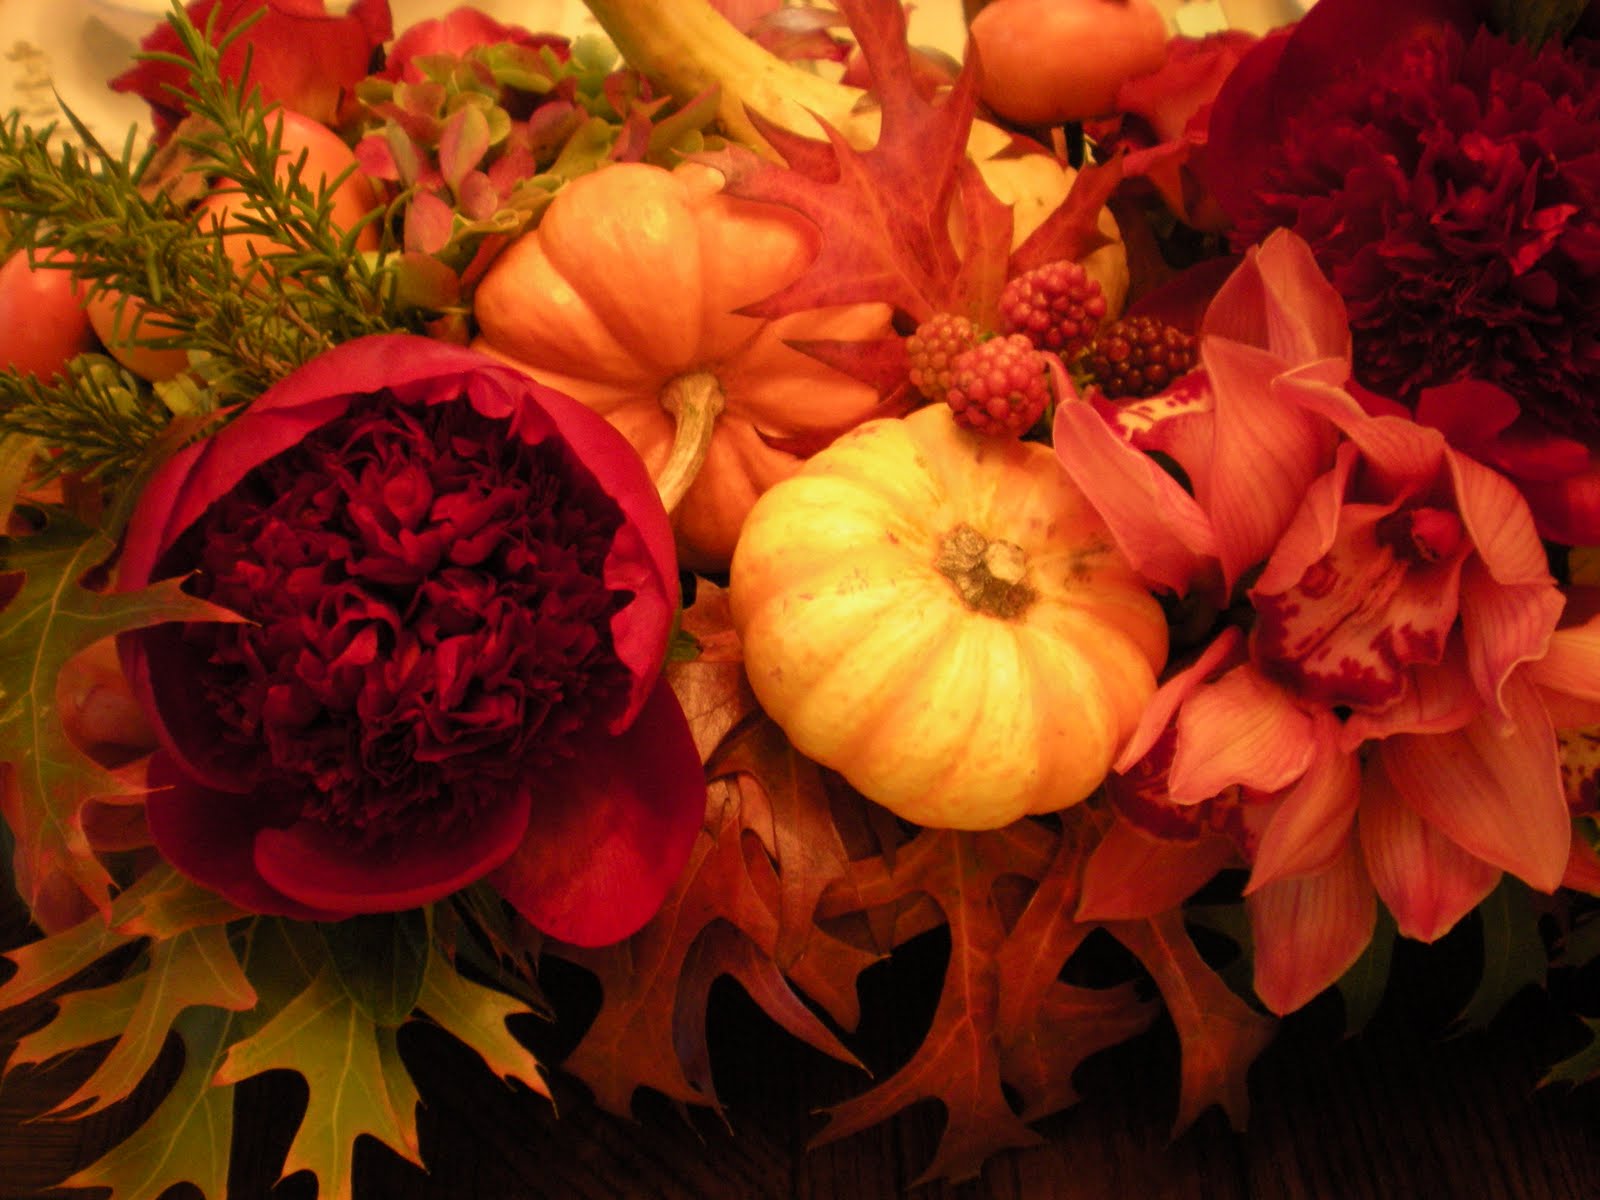 Fall into this flower, a tall centerpiece floral